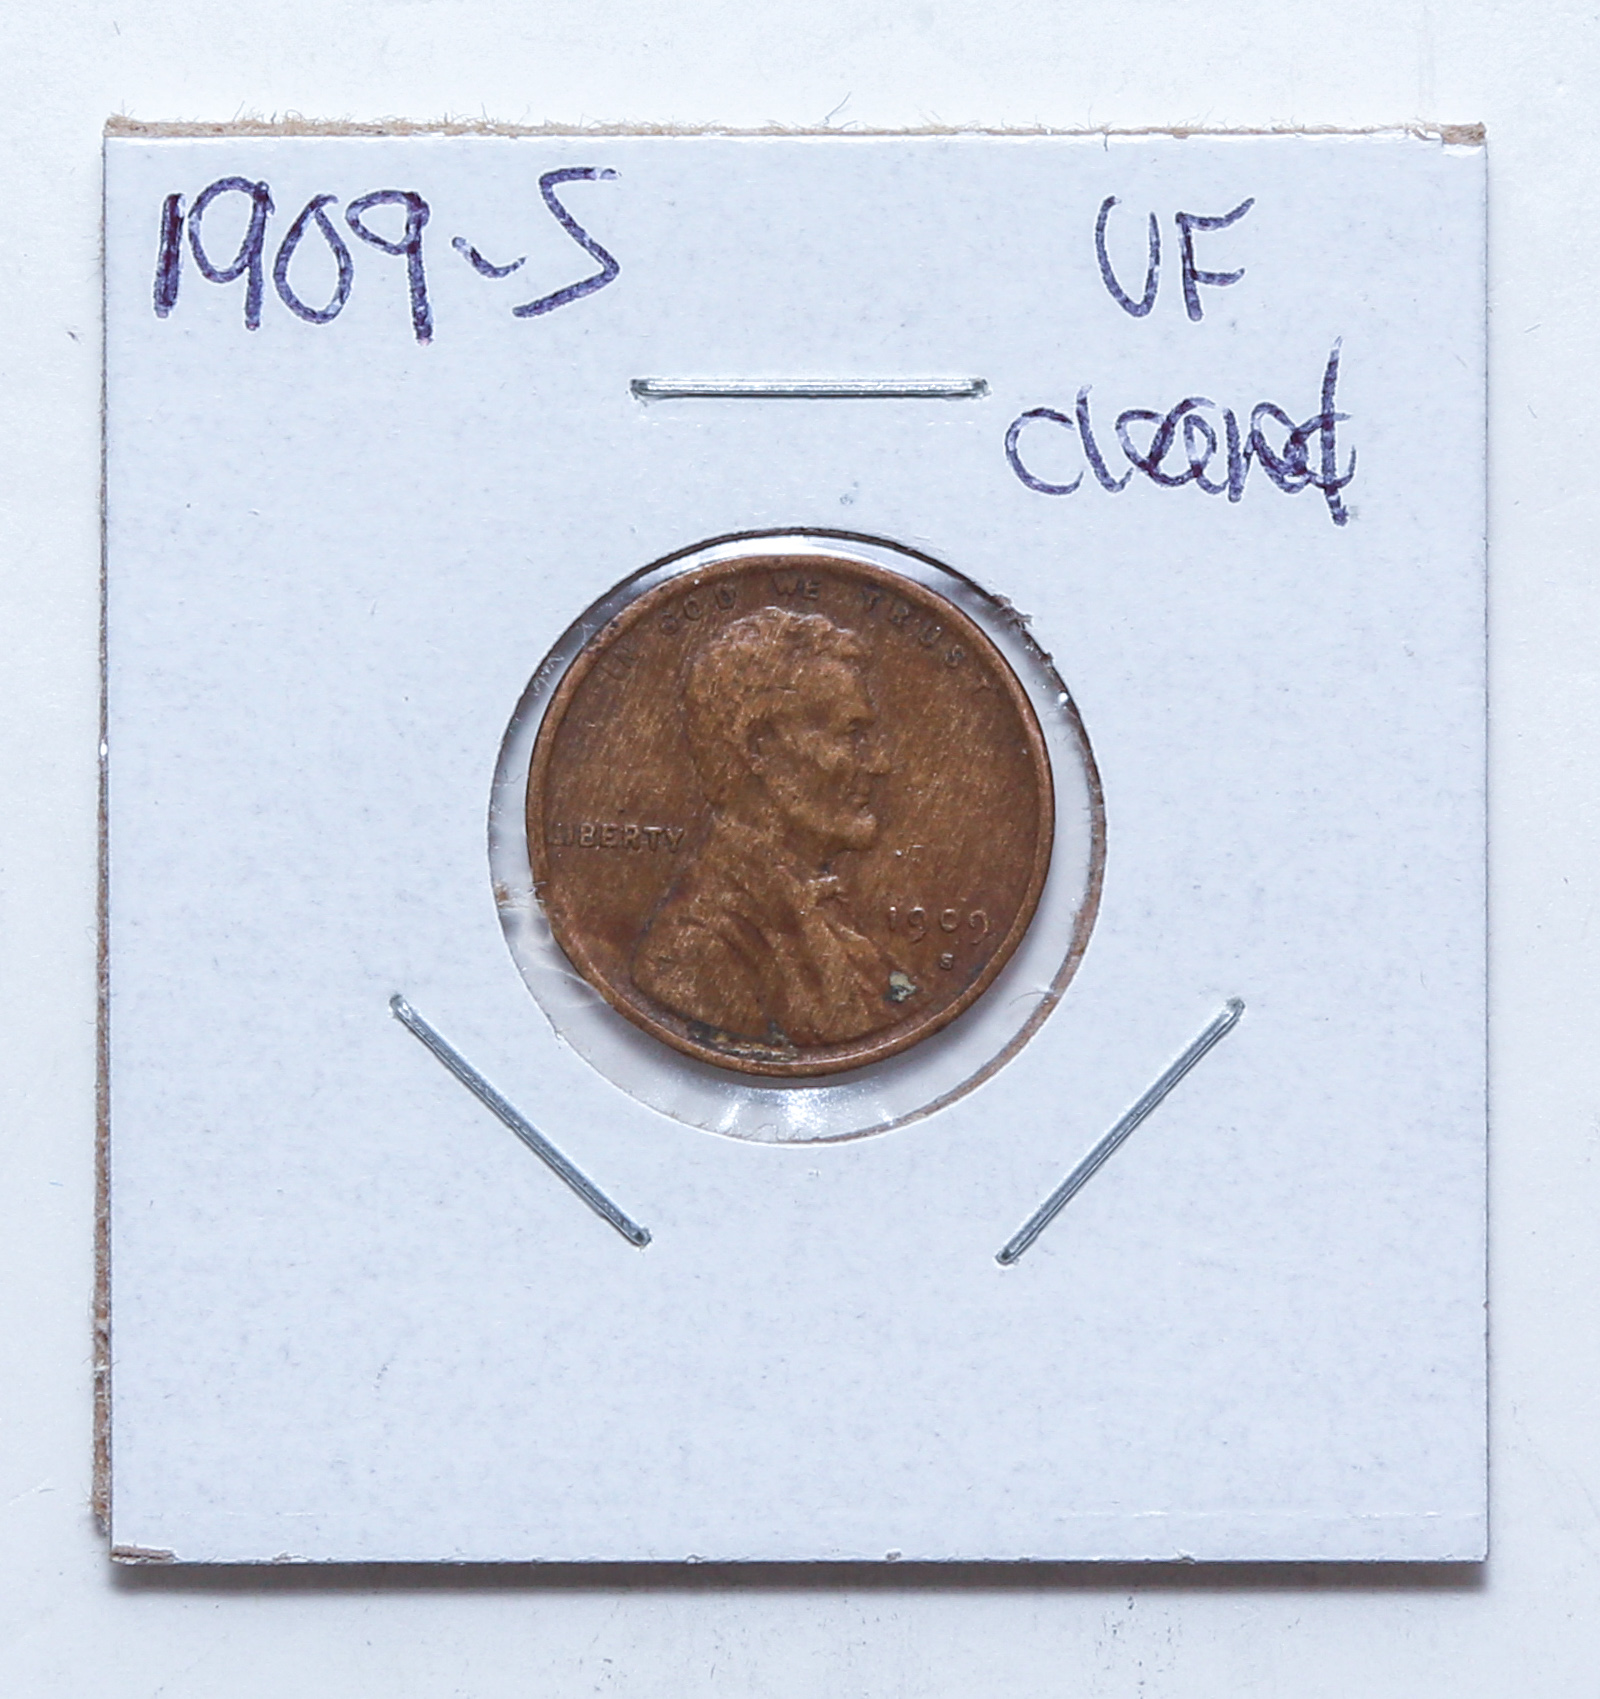 1909 S LINCOLN CENT VF CLEANED 3c7734